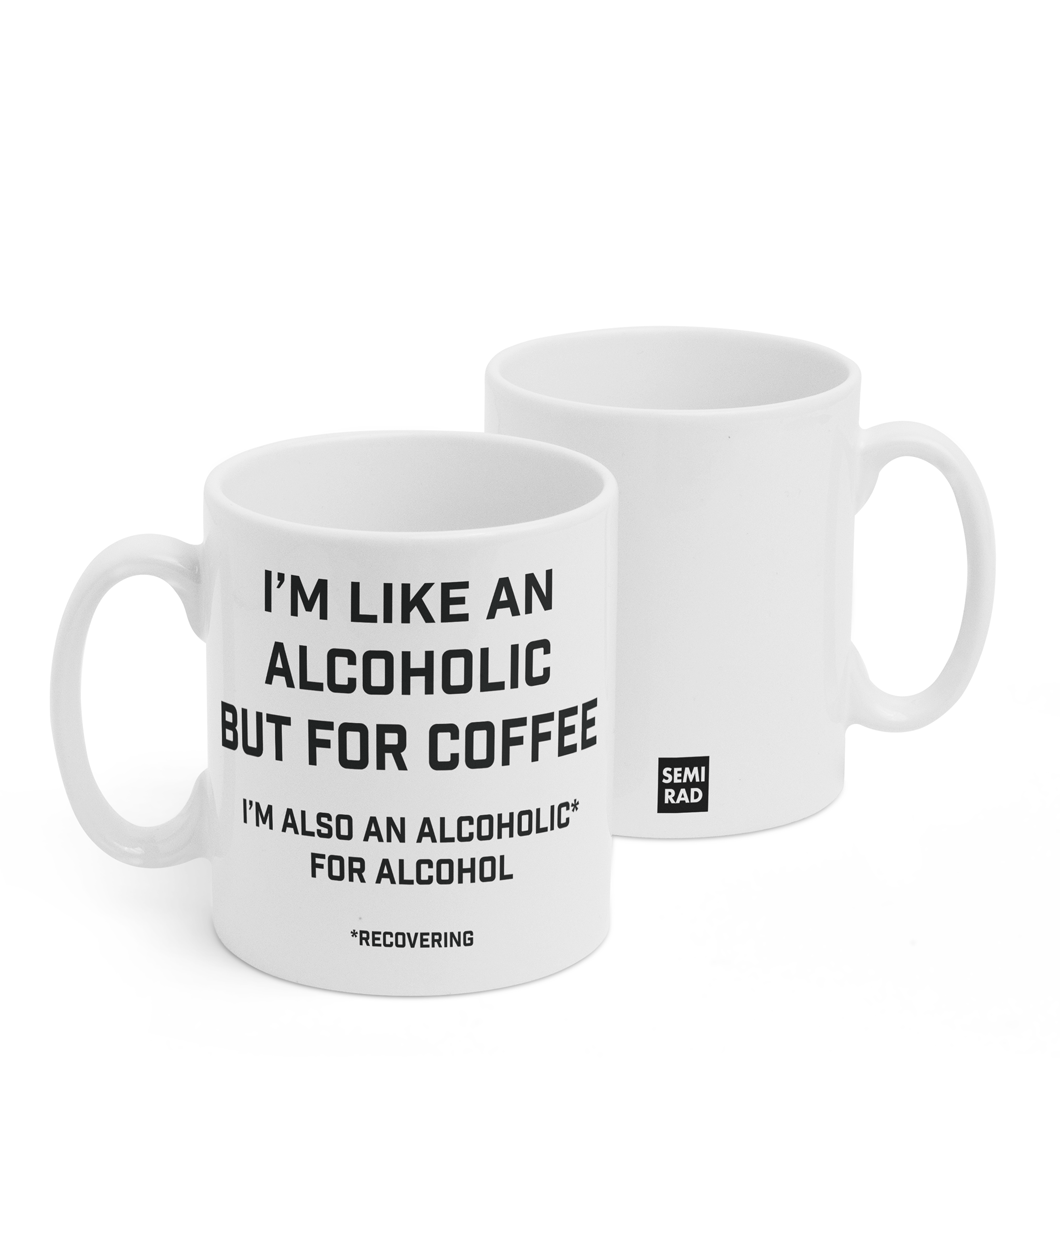 Two white mugs sitting next to each other showing two sides of the same mug. The front side has text that reads "I'm like an alcoholic but for coffee; I'm also an alcoholic* for alcohol; *recovering" in black, caps lettering. On the back of the mug is a small black square with the words "Semi Rad".